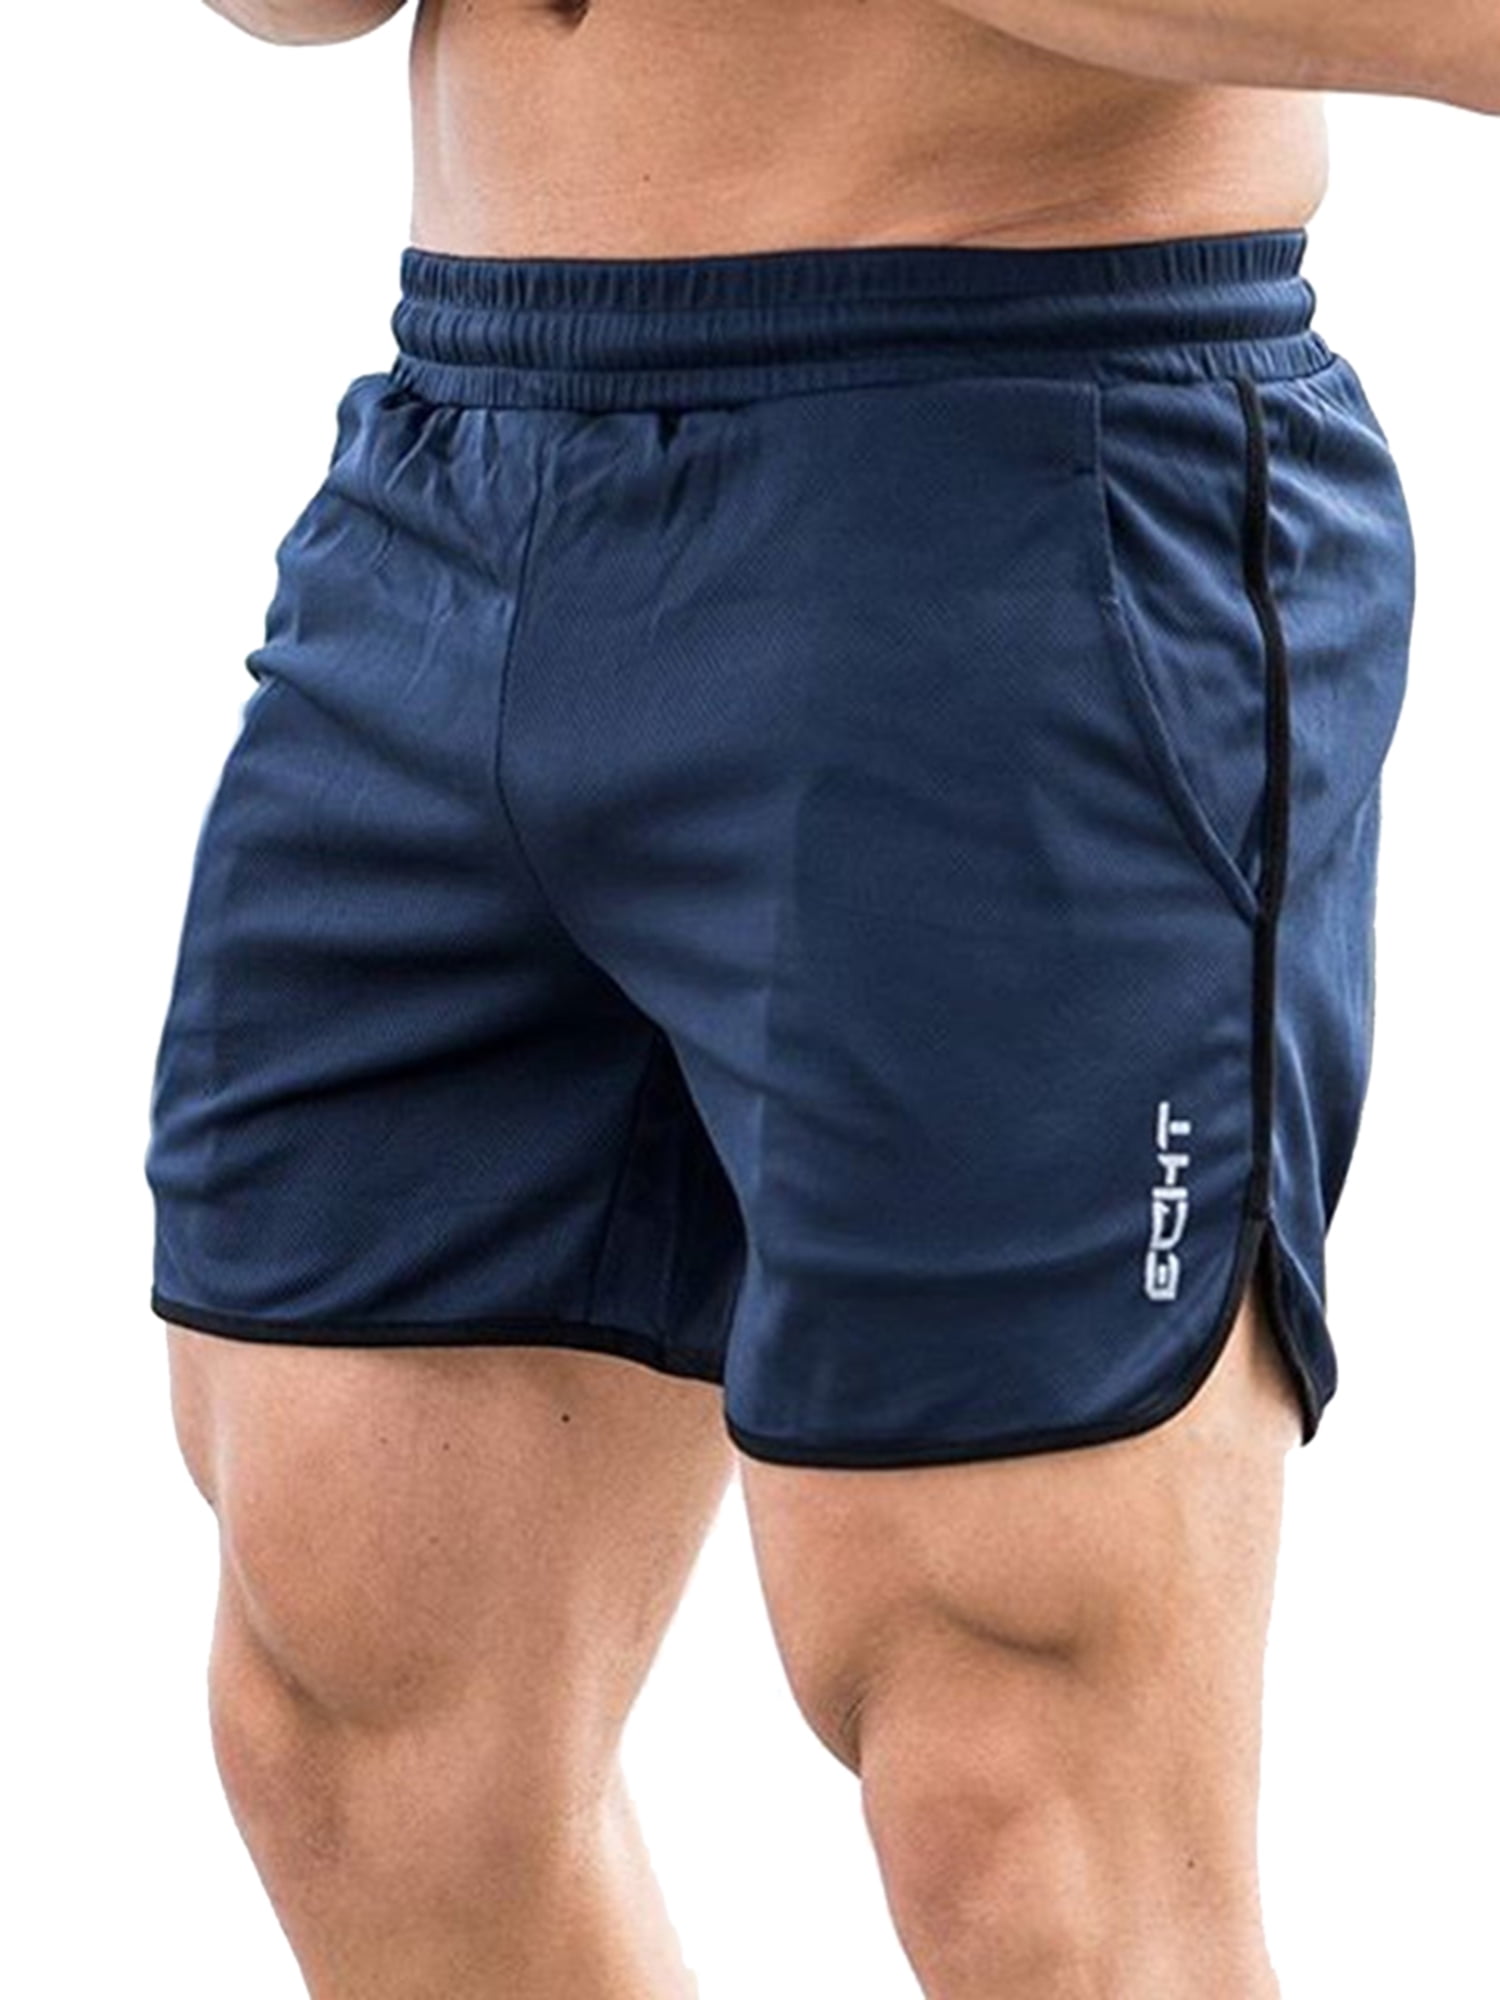 Jogging Training Shorts Pants Details about   2021 Men 2 In 1 Quick Dry Running 